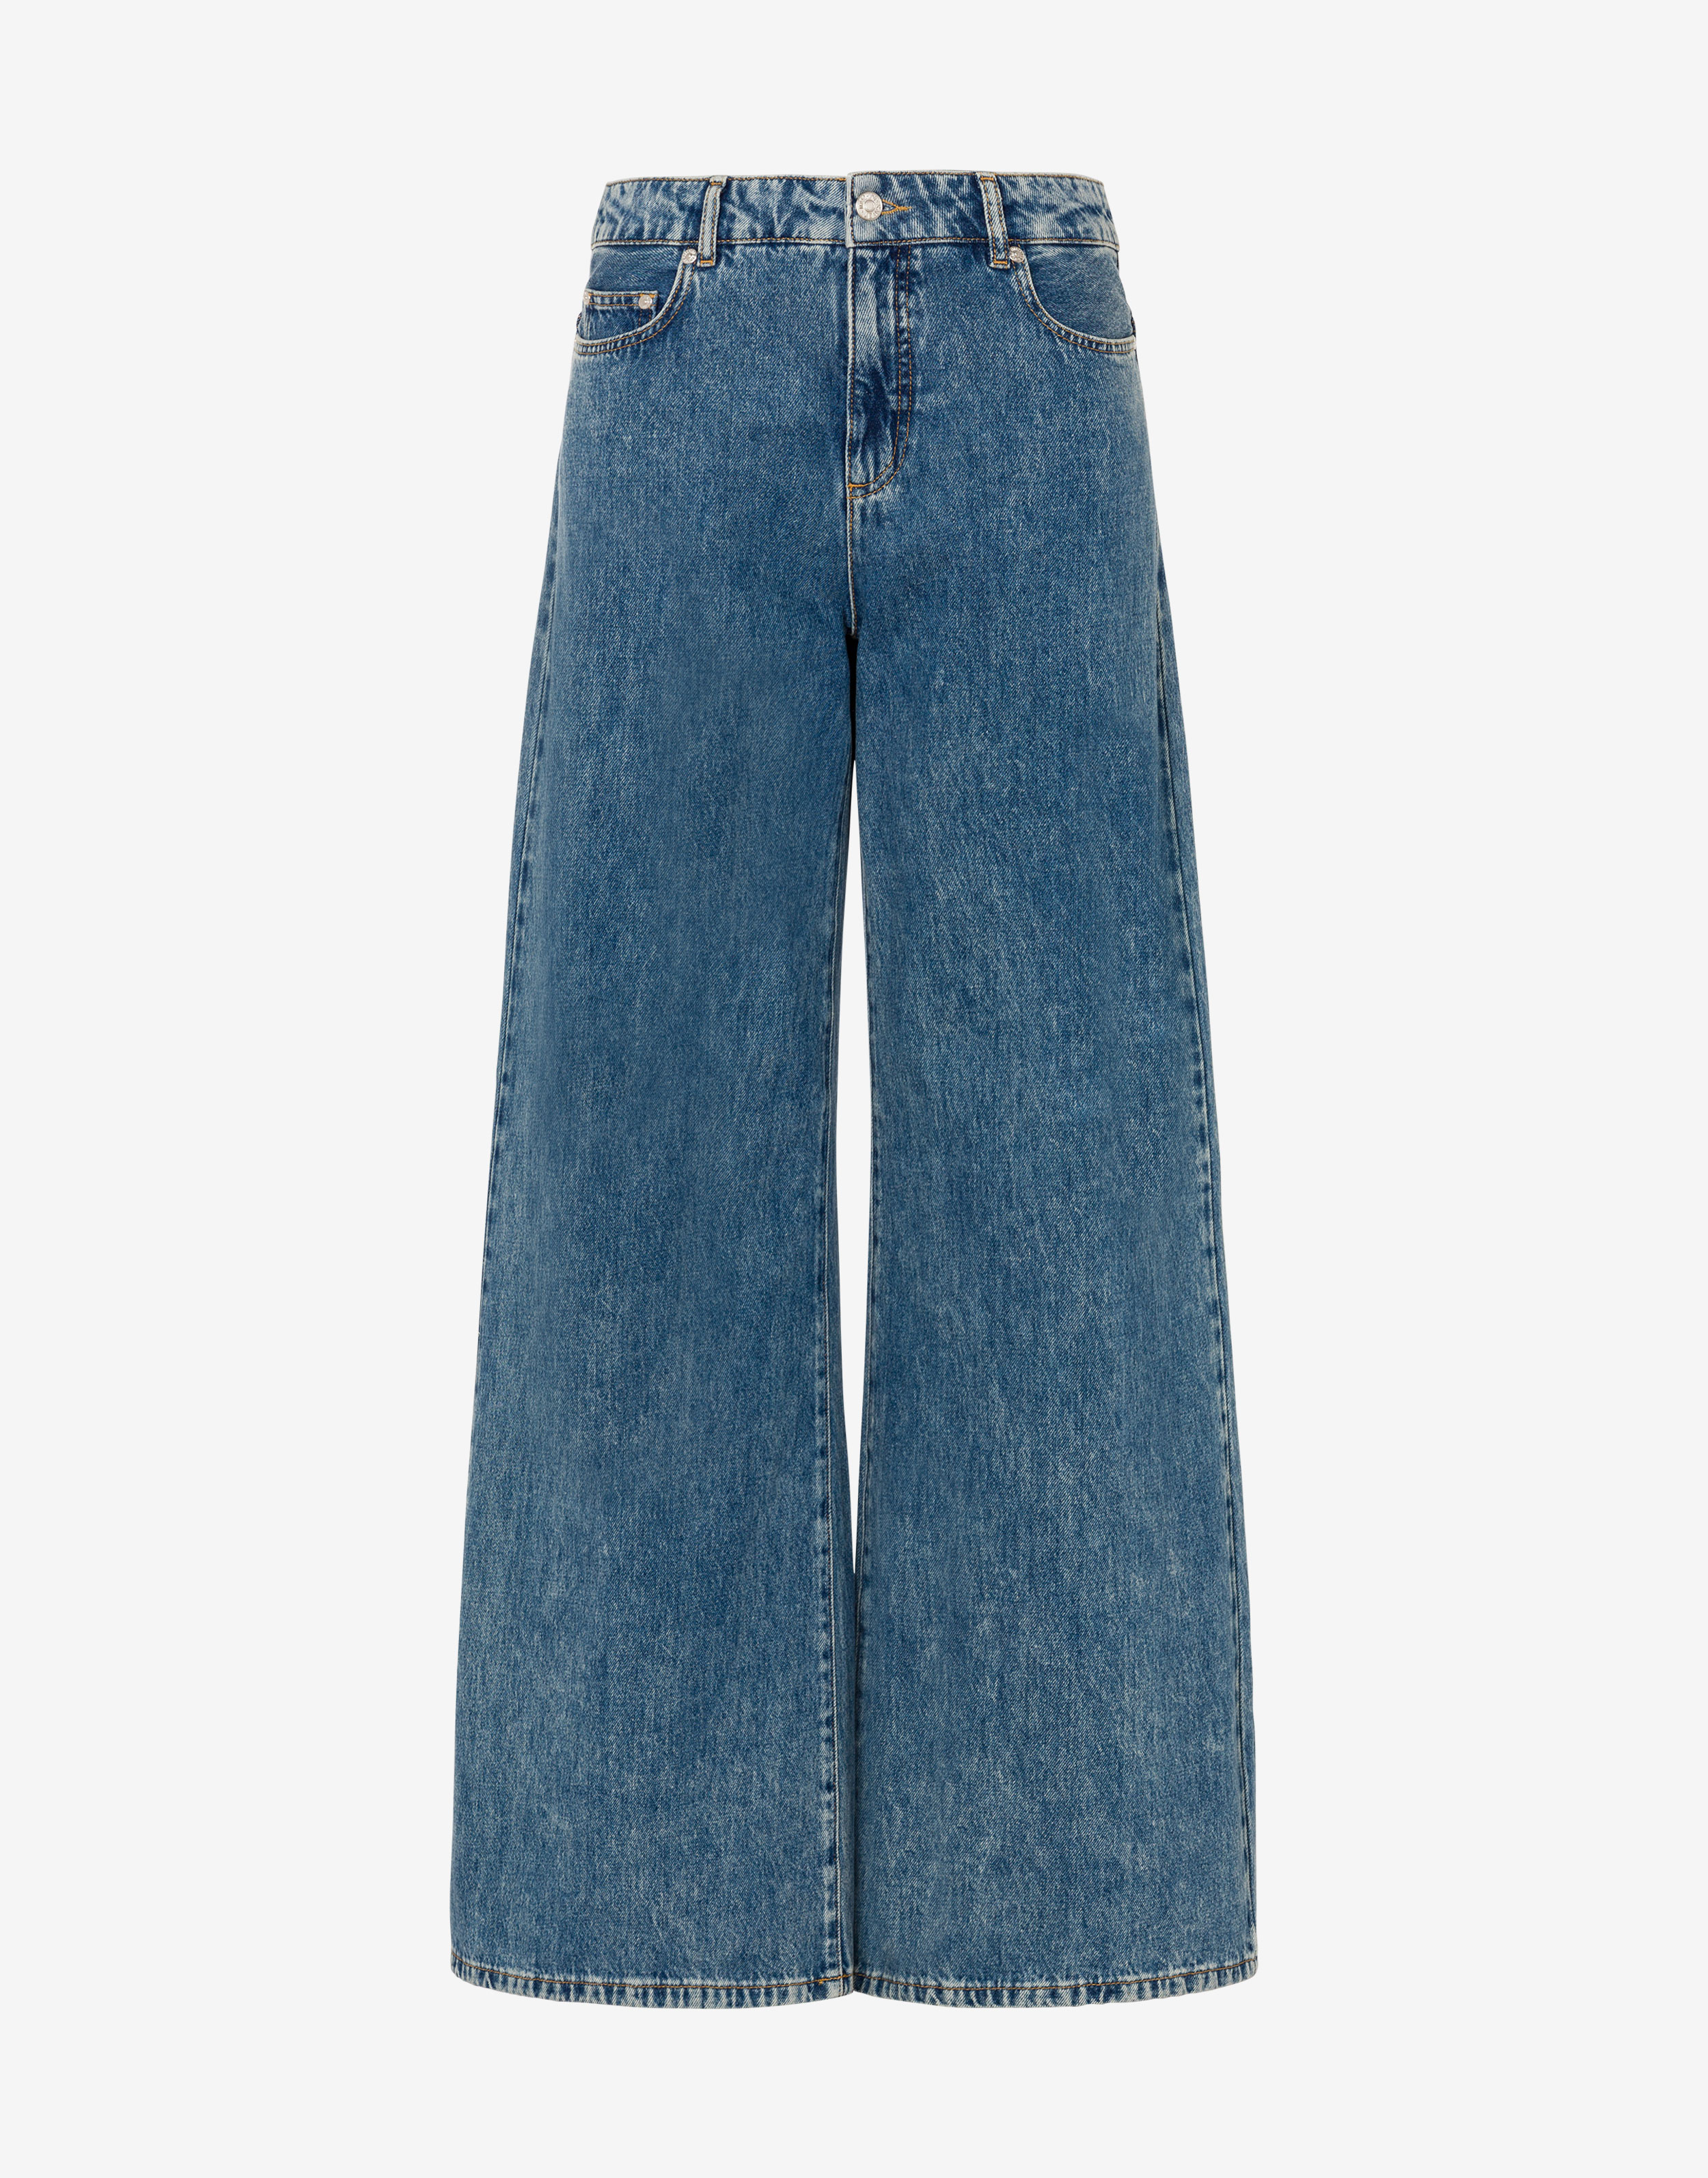 Heart Stitchings denim wide trousers